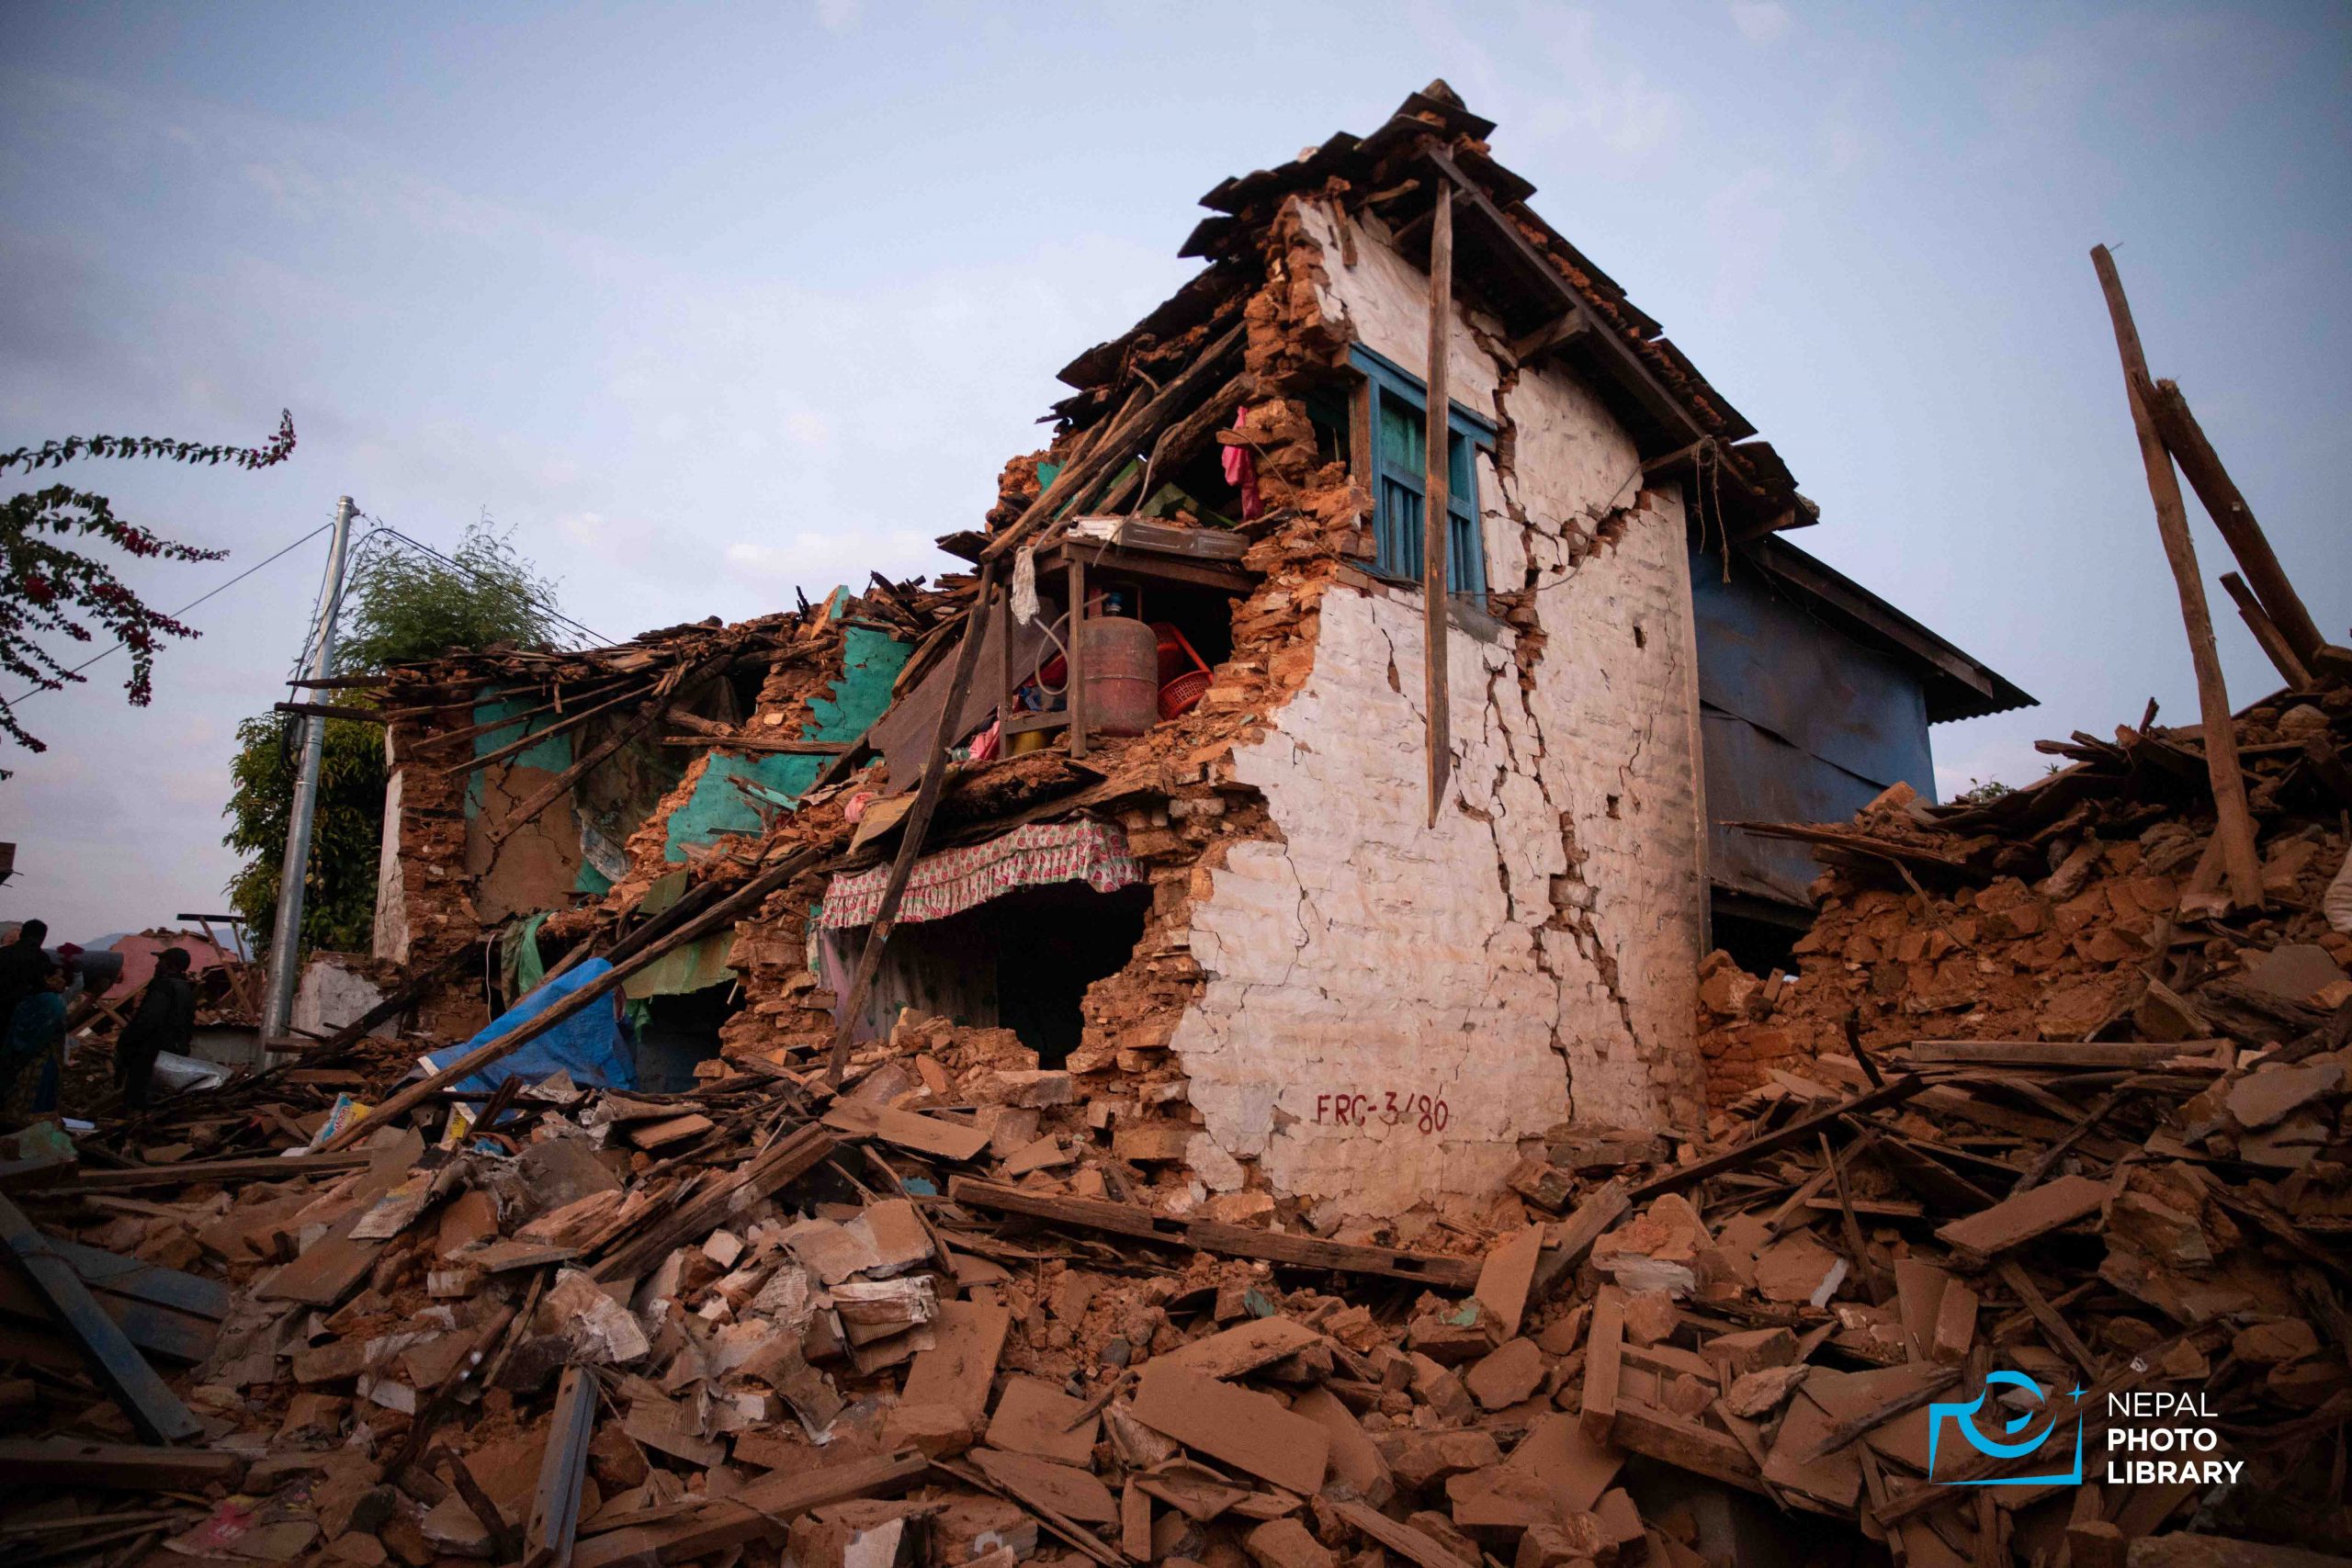 Film artists & producers aid for earthquake victims